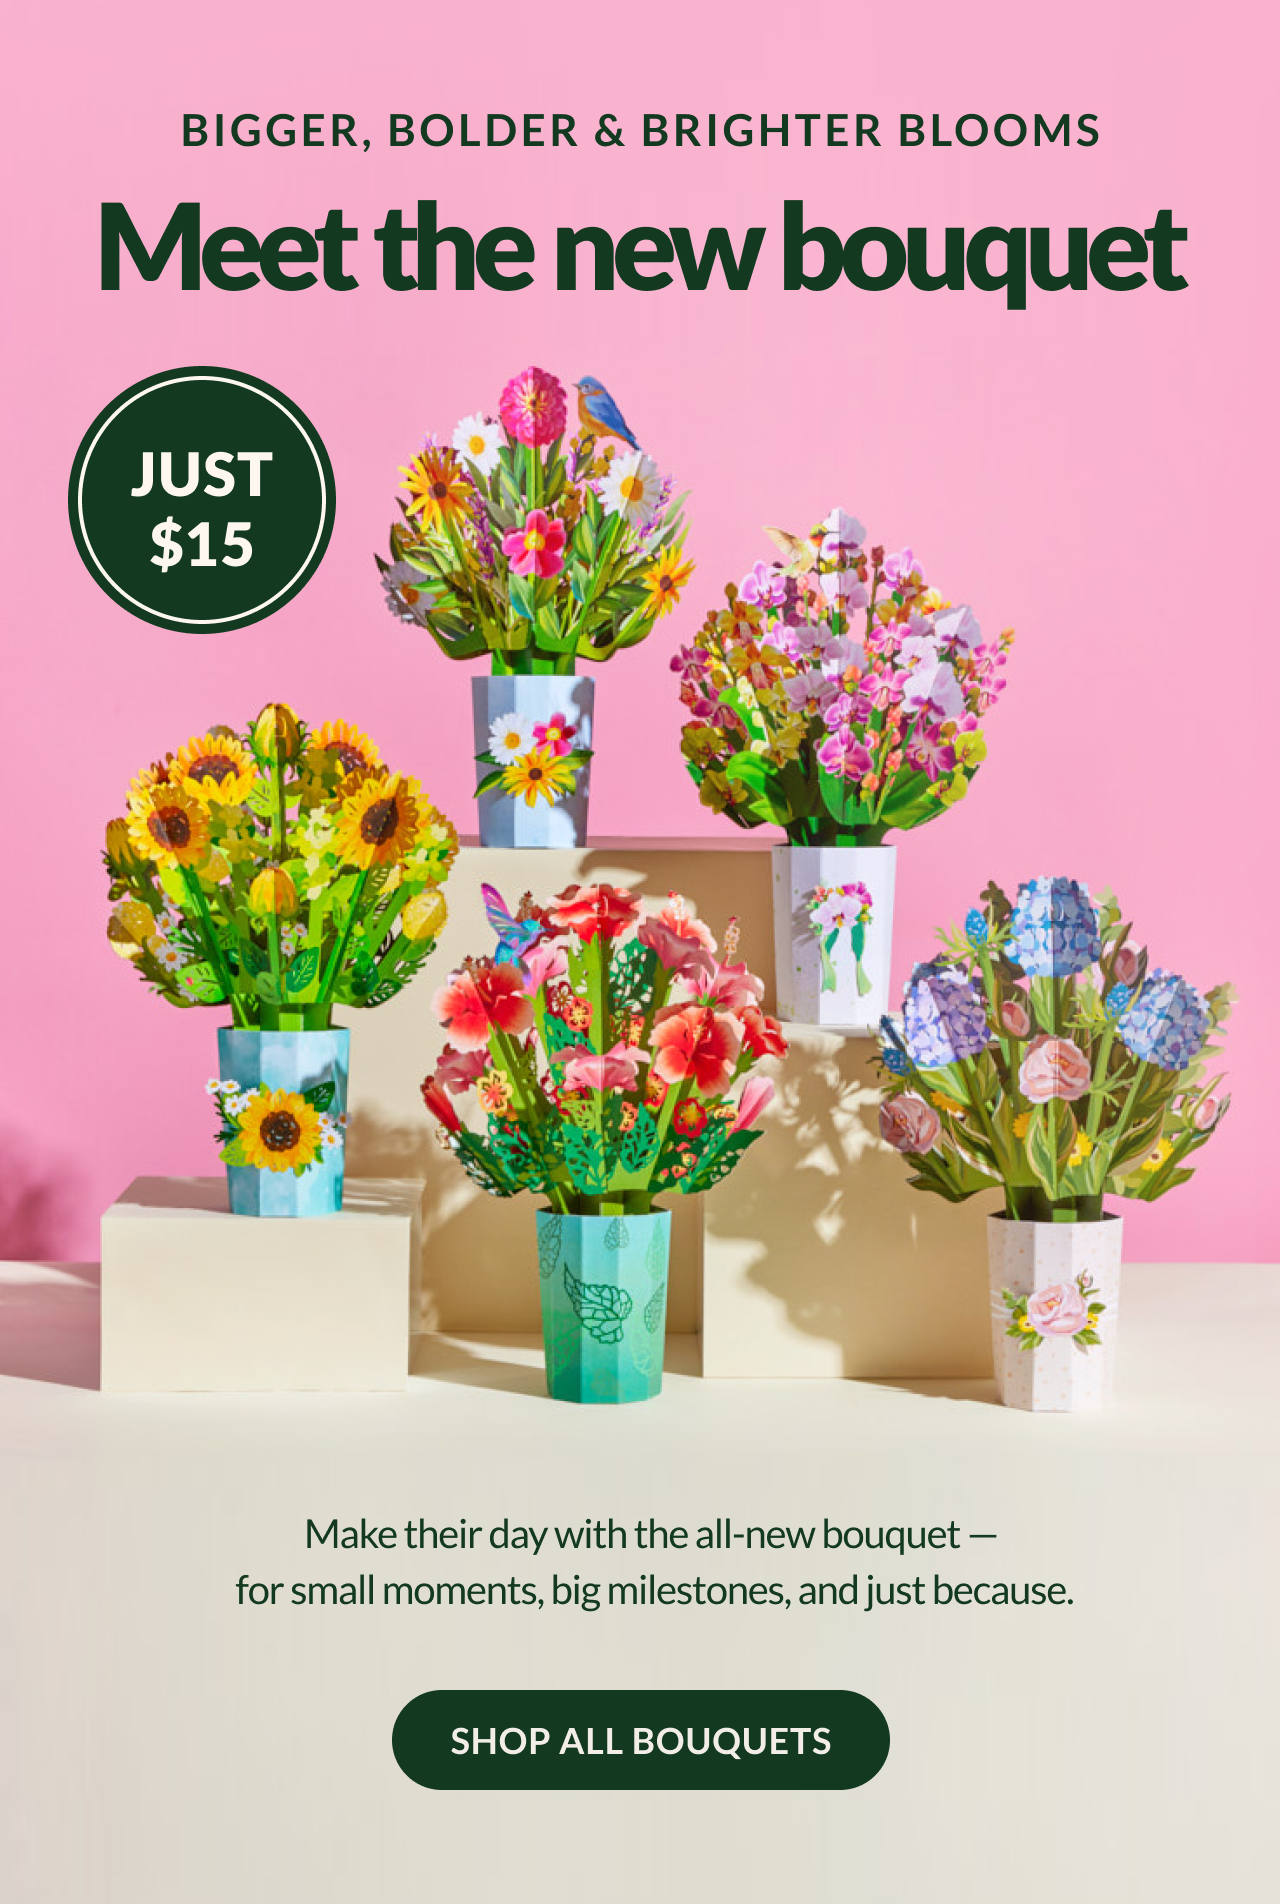 BIGGER, BOLDER & BRIGHTER BLOOMS | Meet the new bouquet | JUST $15 | Make their day with the all-new-bouquet - for small moments, big milestones, and just because | SHOP ALL BOUQUETS